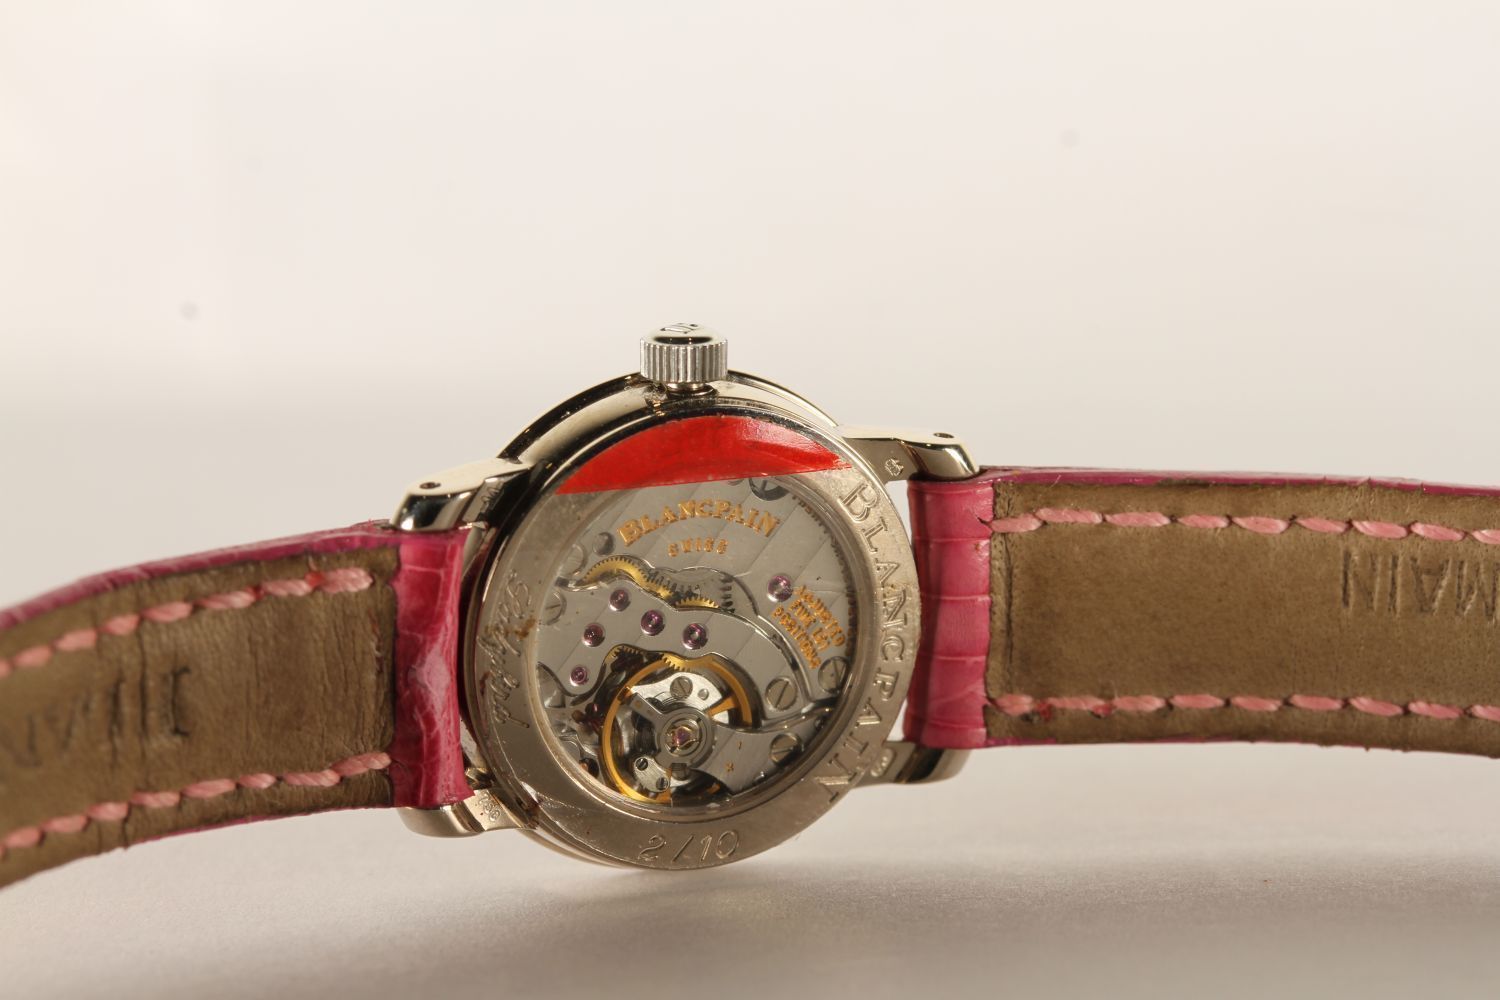 NOS LADIES BLANCPAIN LADYBIRD WRISTWATCH, circular pink mother of pearl dial with roman numerals, - Image 4 of 4